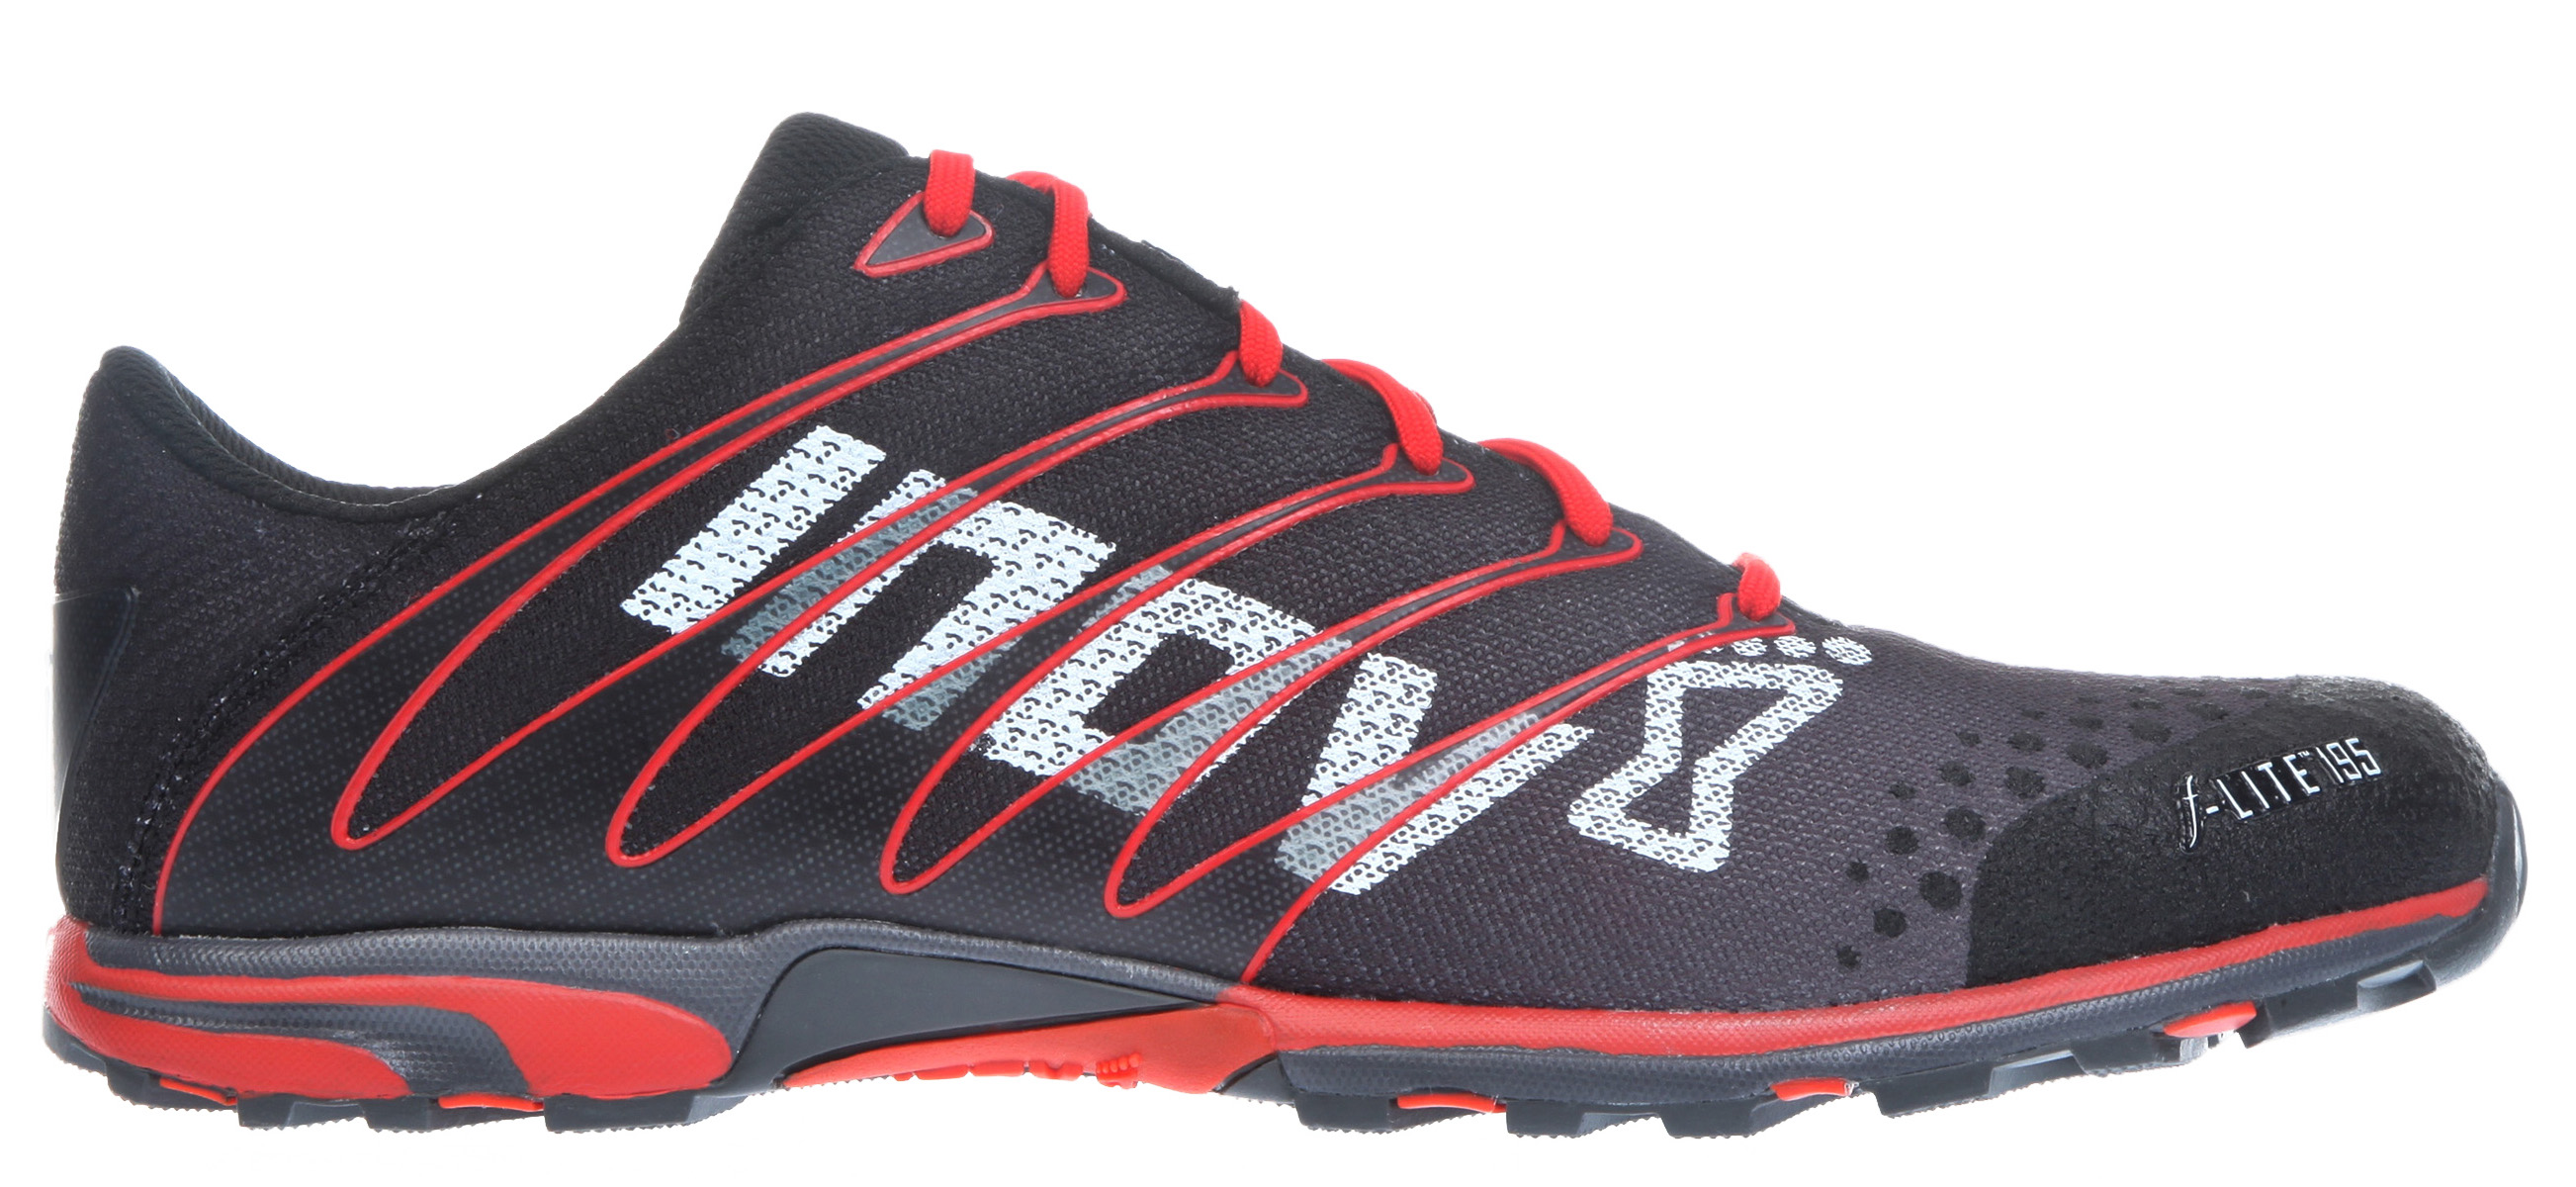 New Inov-8 F-Lite 195s with RopeTec Technology